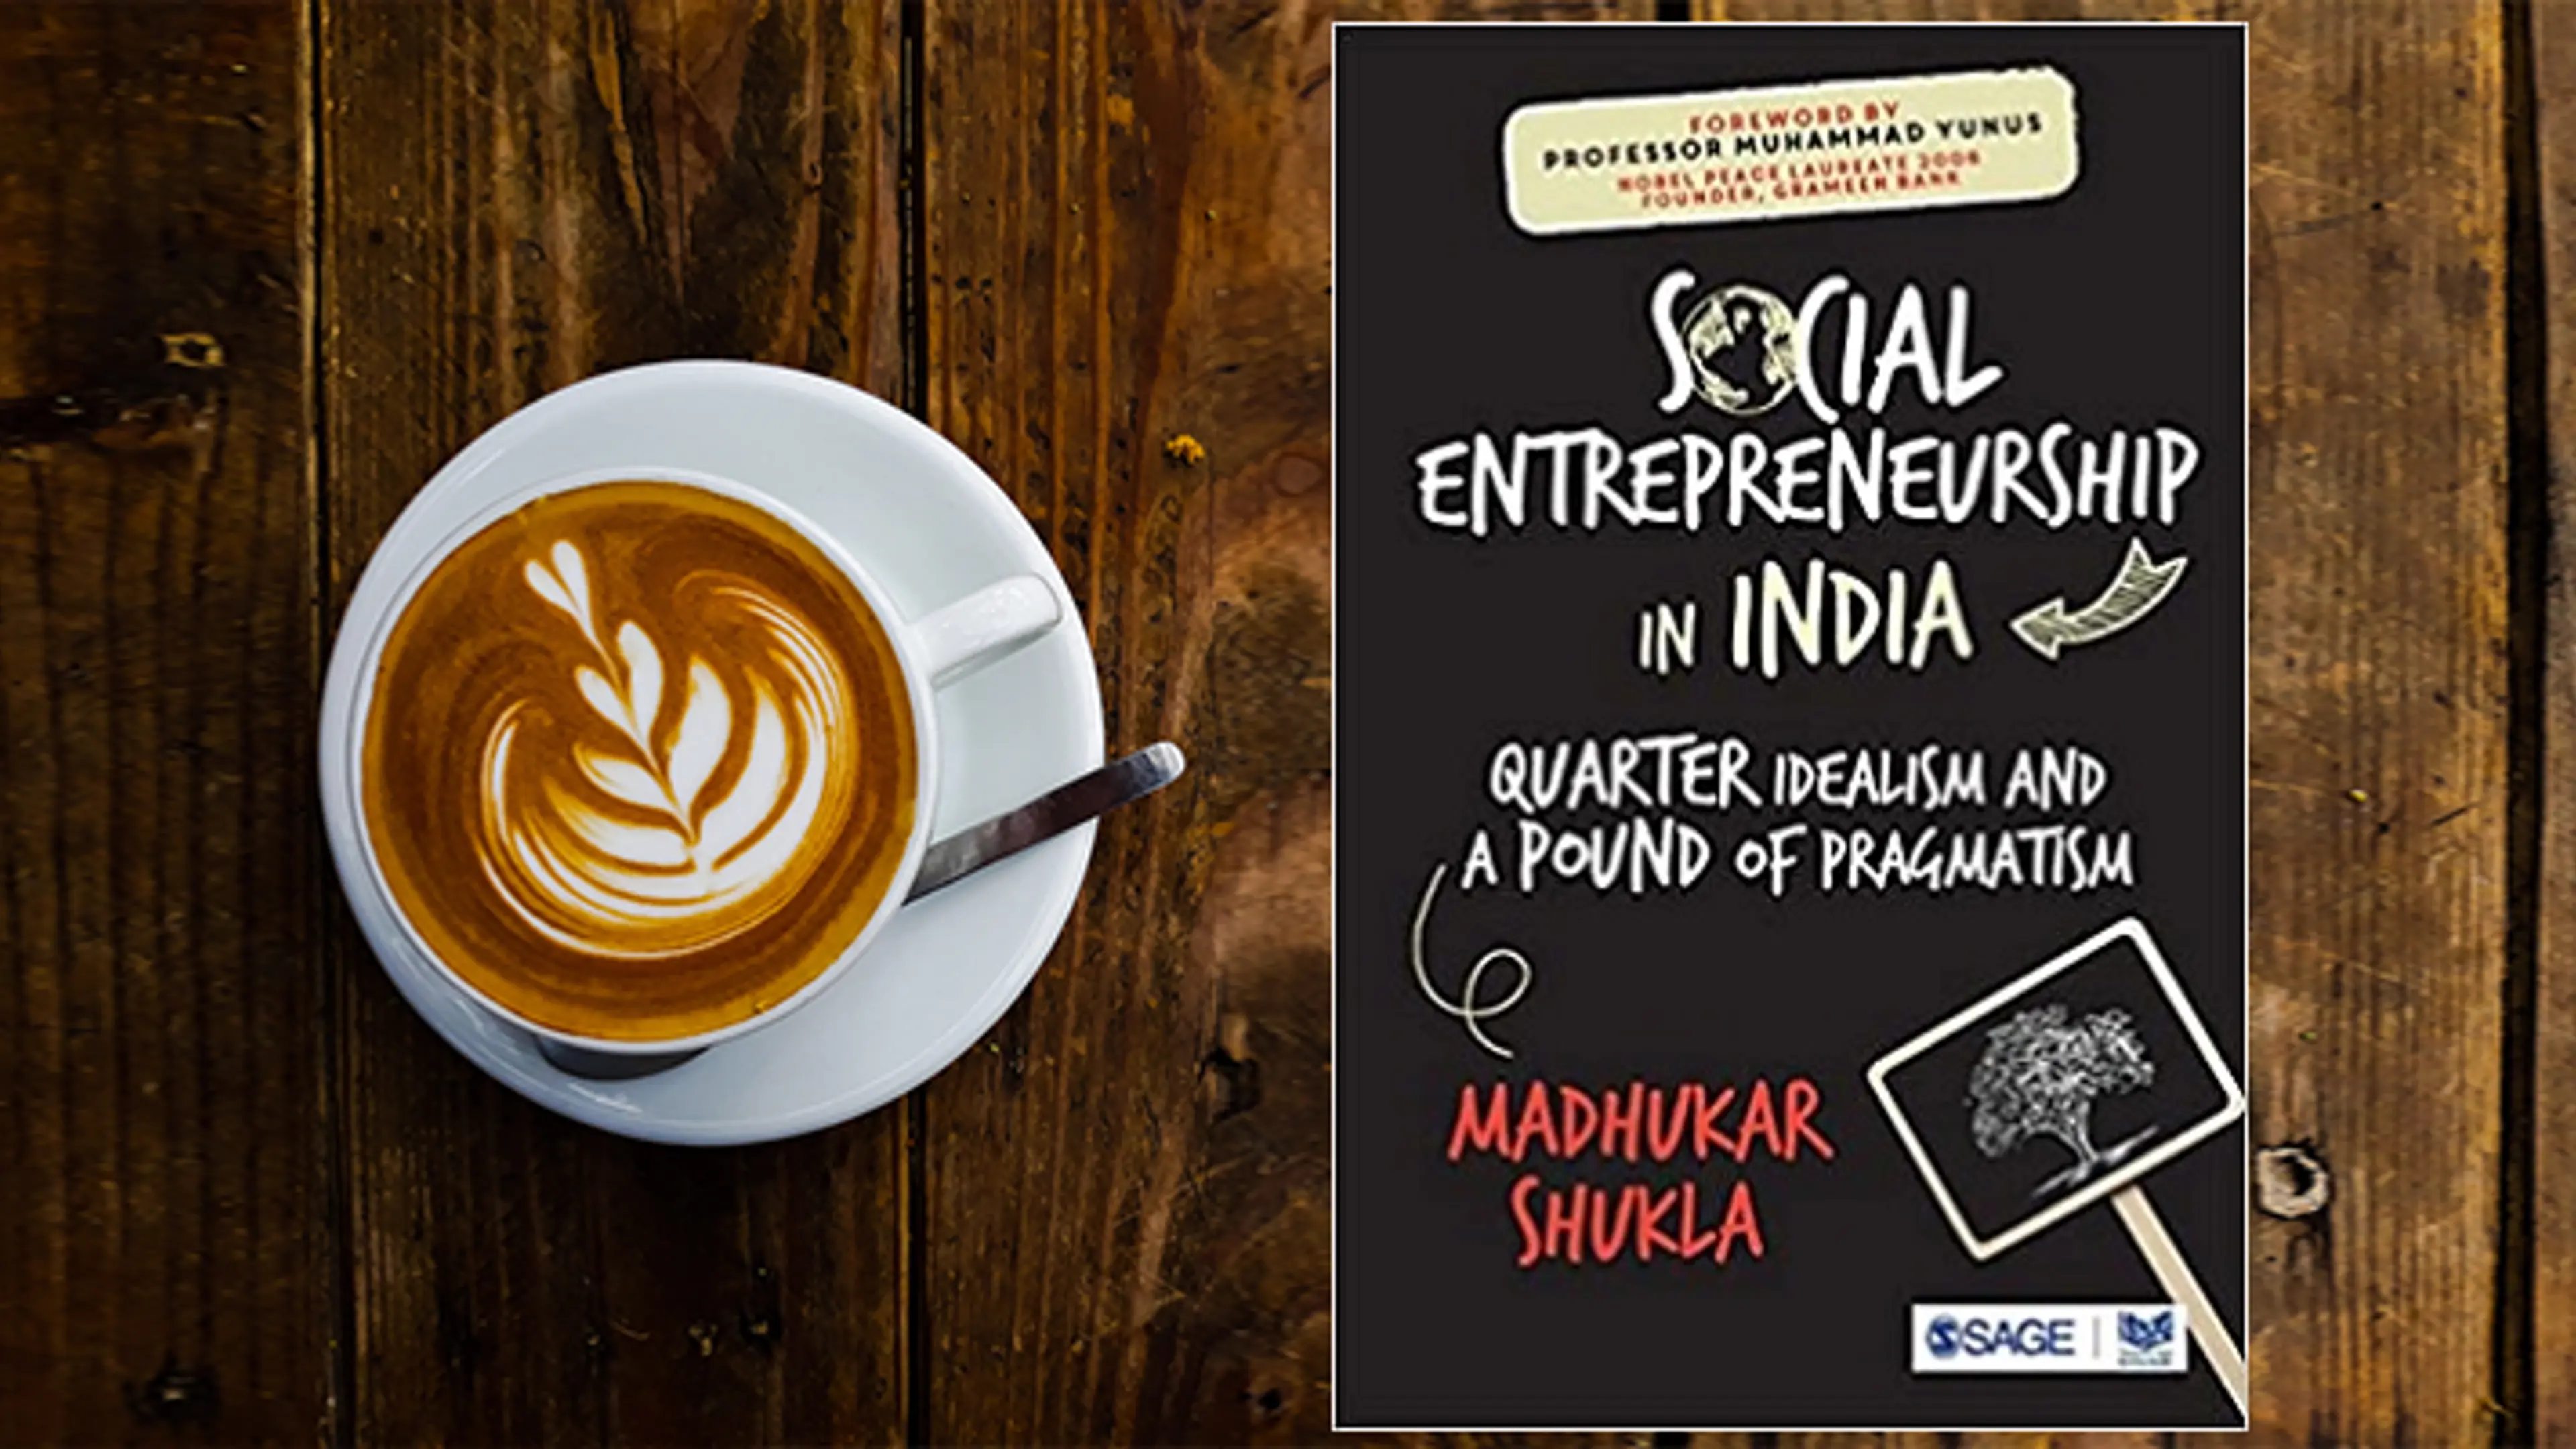 Social entrepreneurship in India: how these frameworks and case studies power a new wave of change